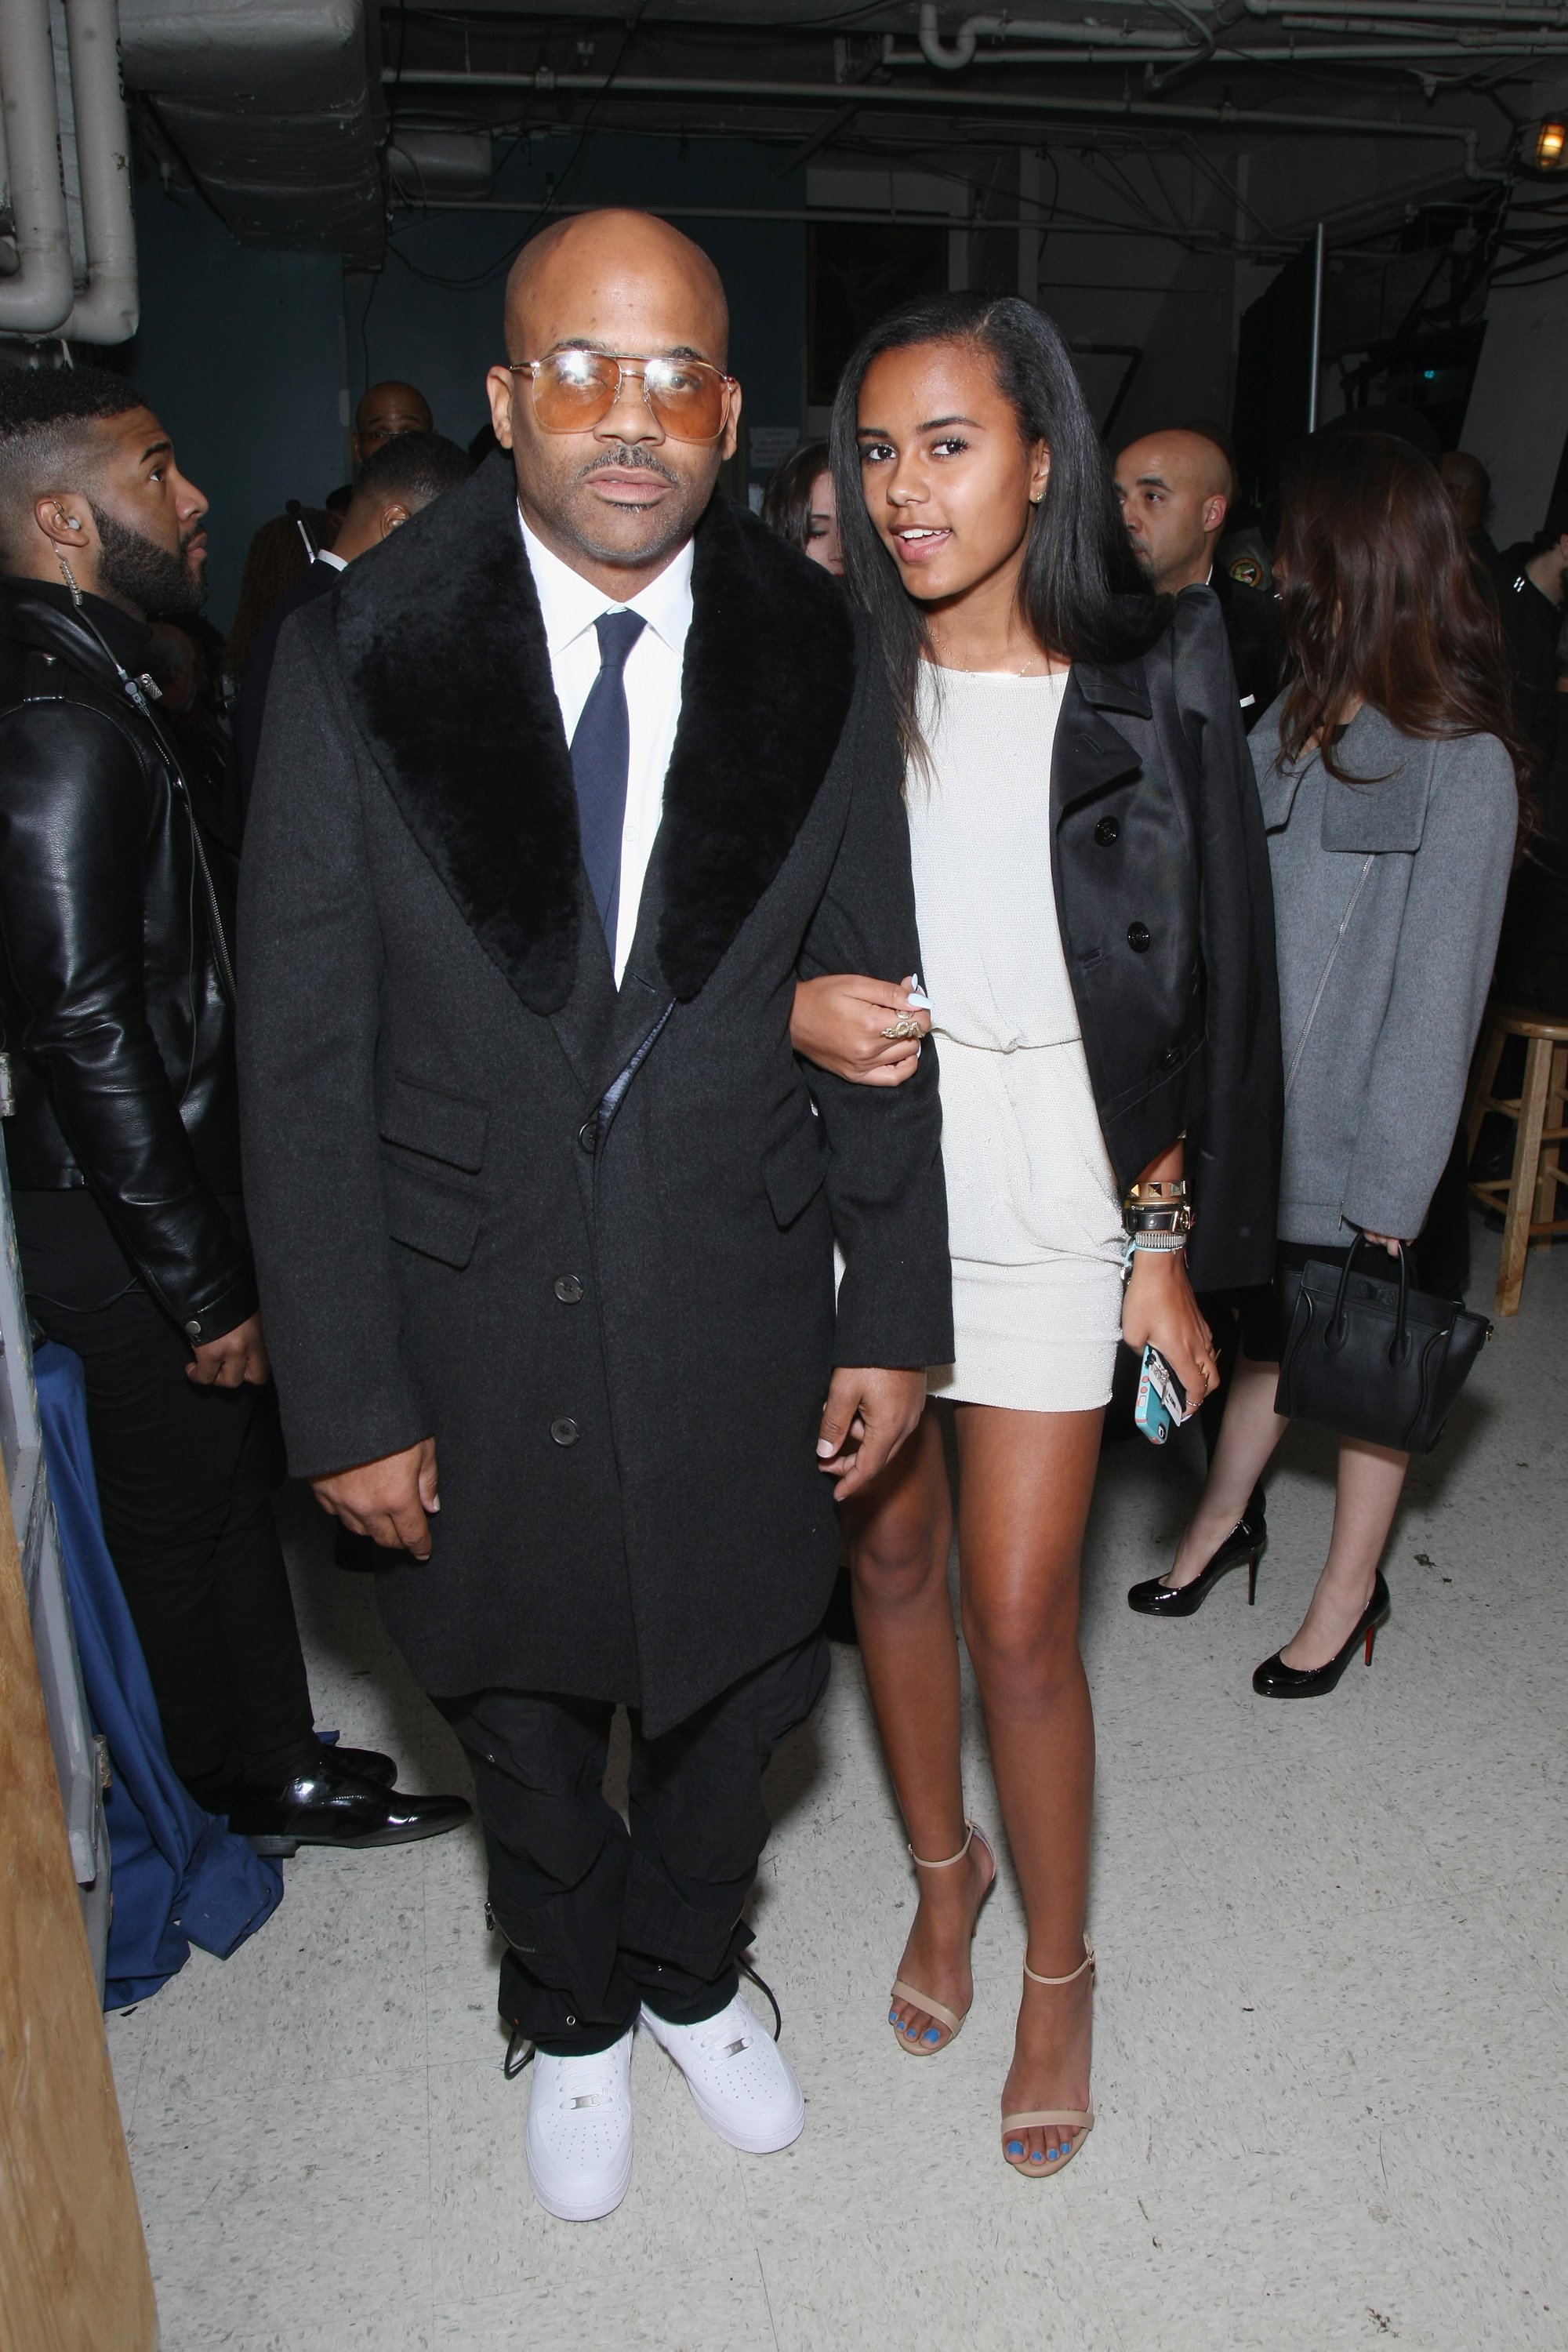 Ava and Damon Dash pose together during "The BET Honors" at Warner Theatre on January 24, 2015. | Photo: Getty Images